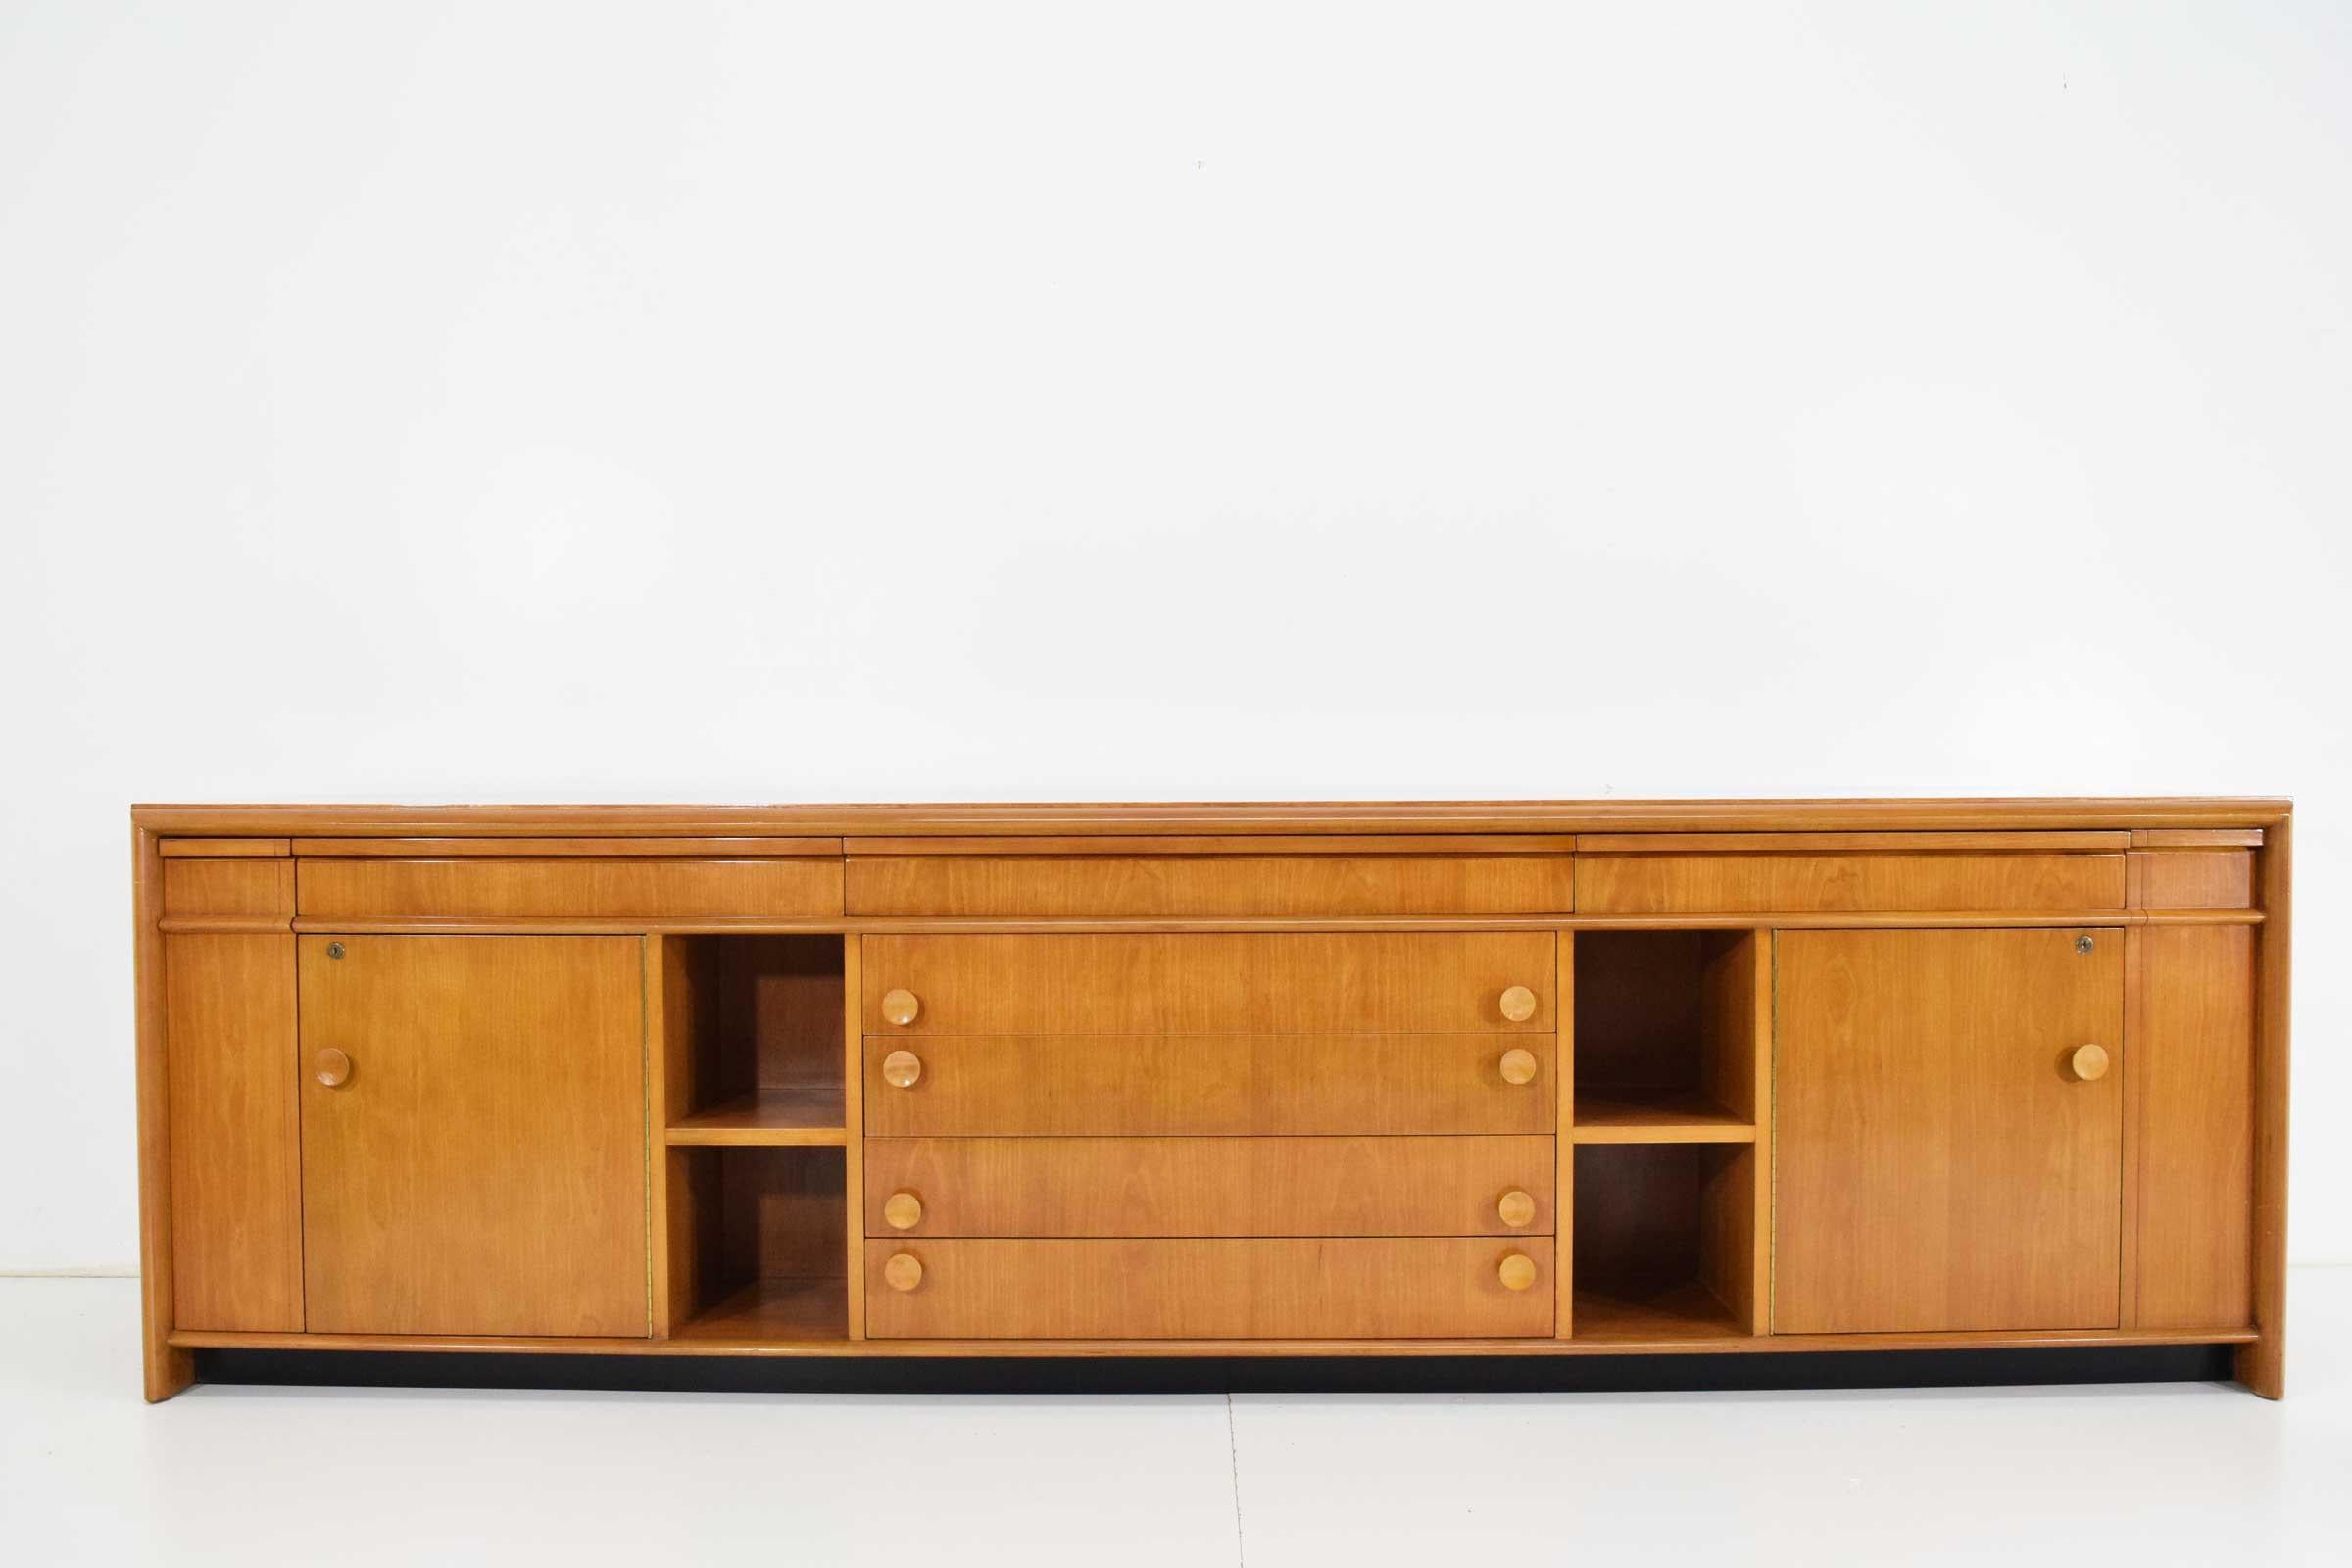 A custom cabinet executed in birch designed by Paul Frankl for the George R. Kravis II collection, circa 1940.